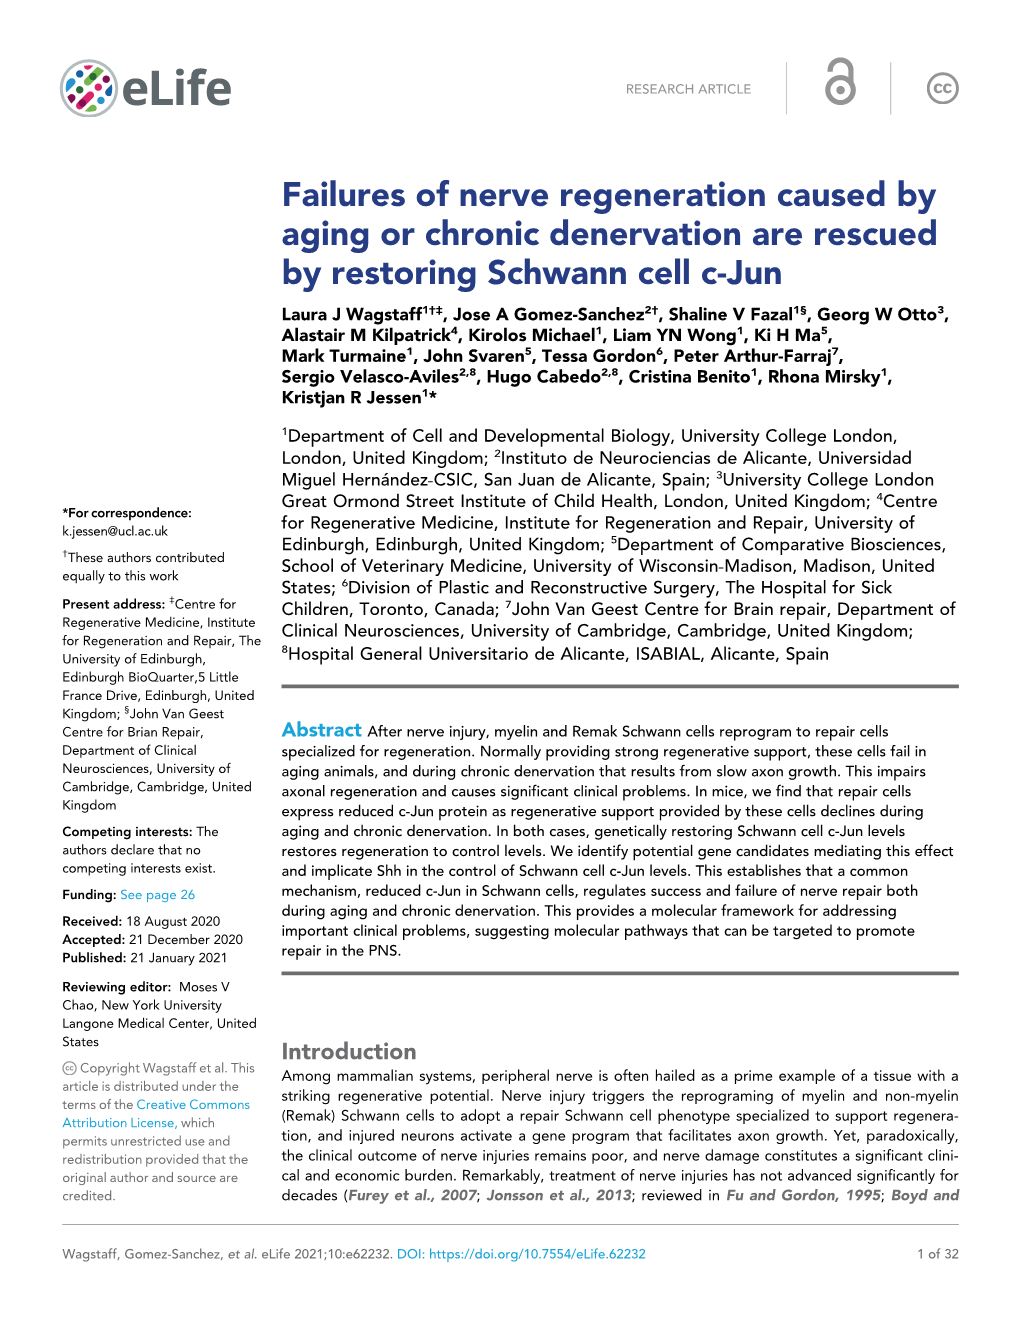 Failures of Nerve Regeneration Caused by Aging Or